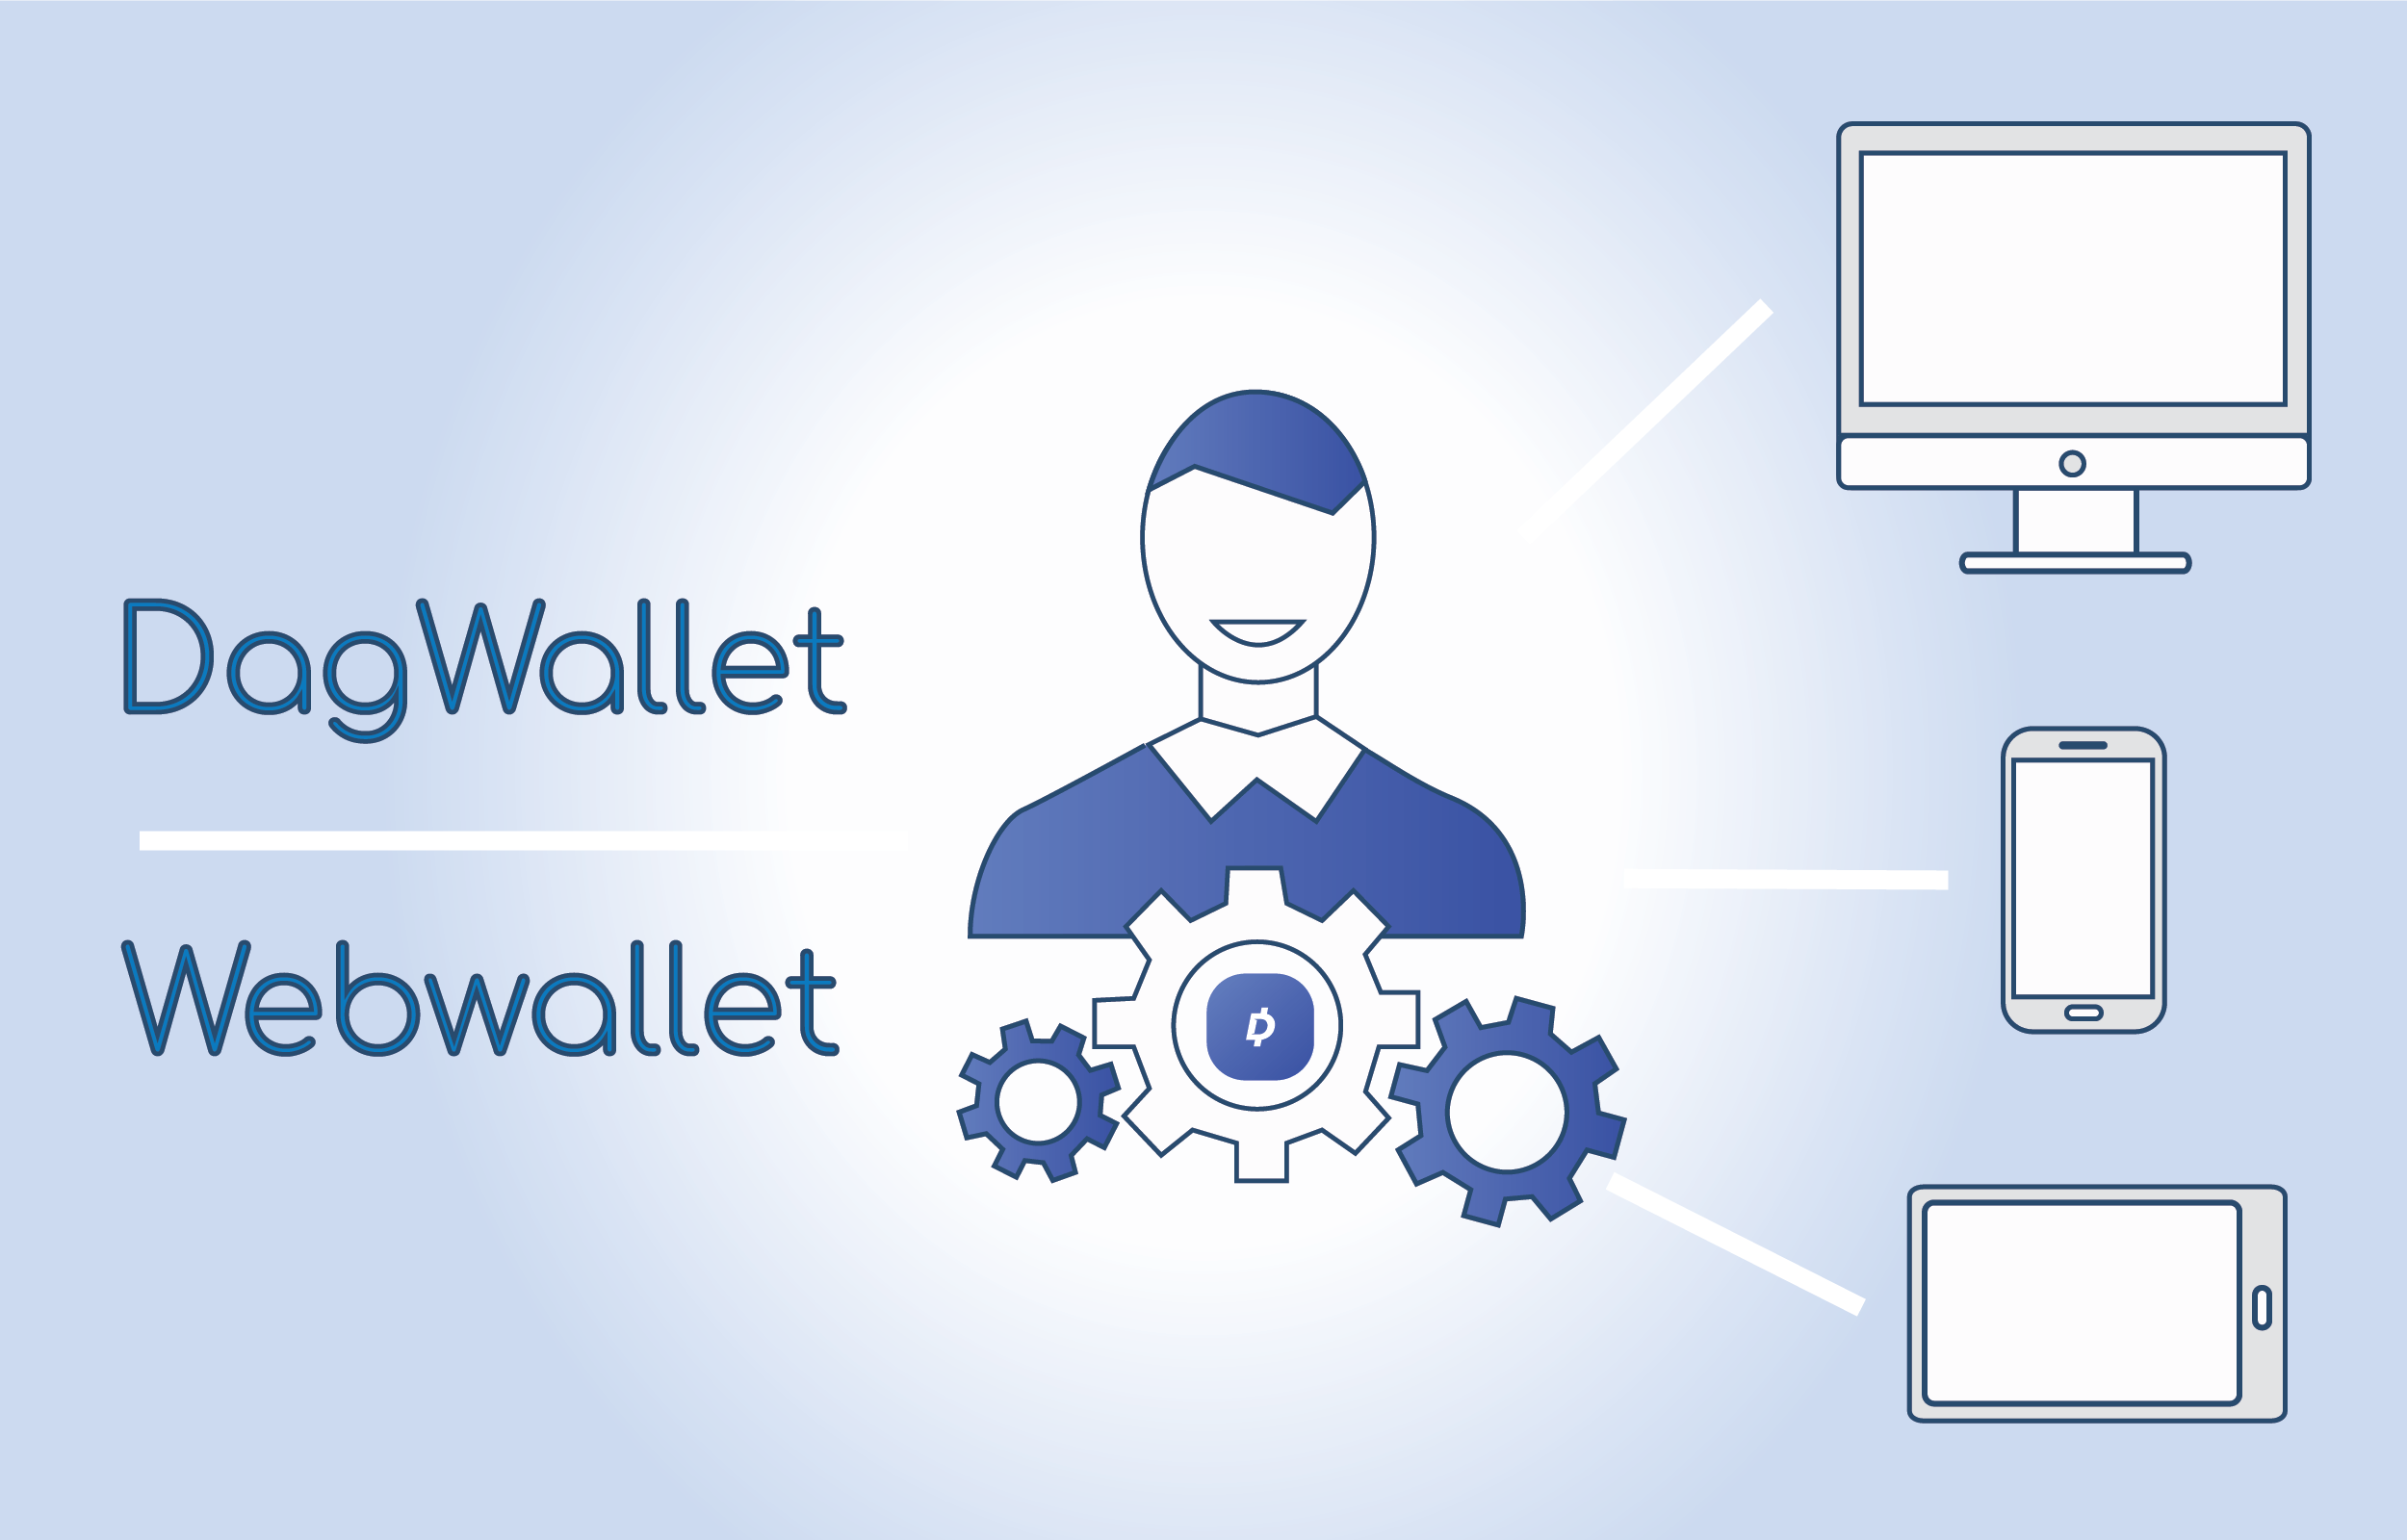 jogger oosters Zuidelijk Let's talk about the DagWallet and webwallet | Dagcoin